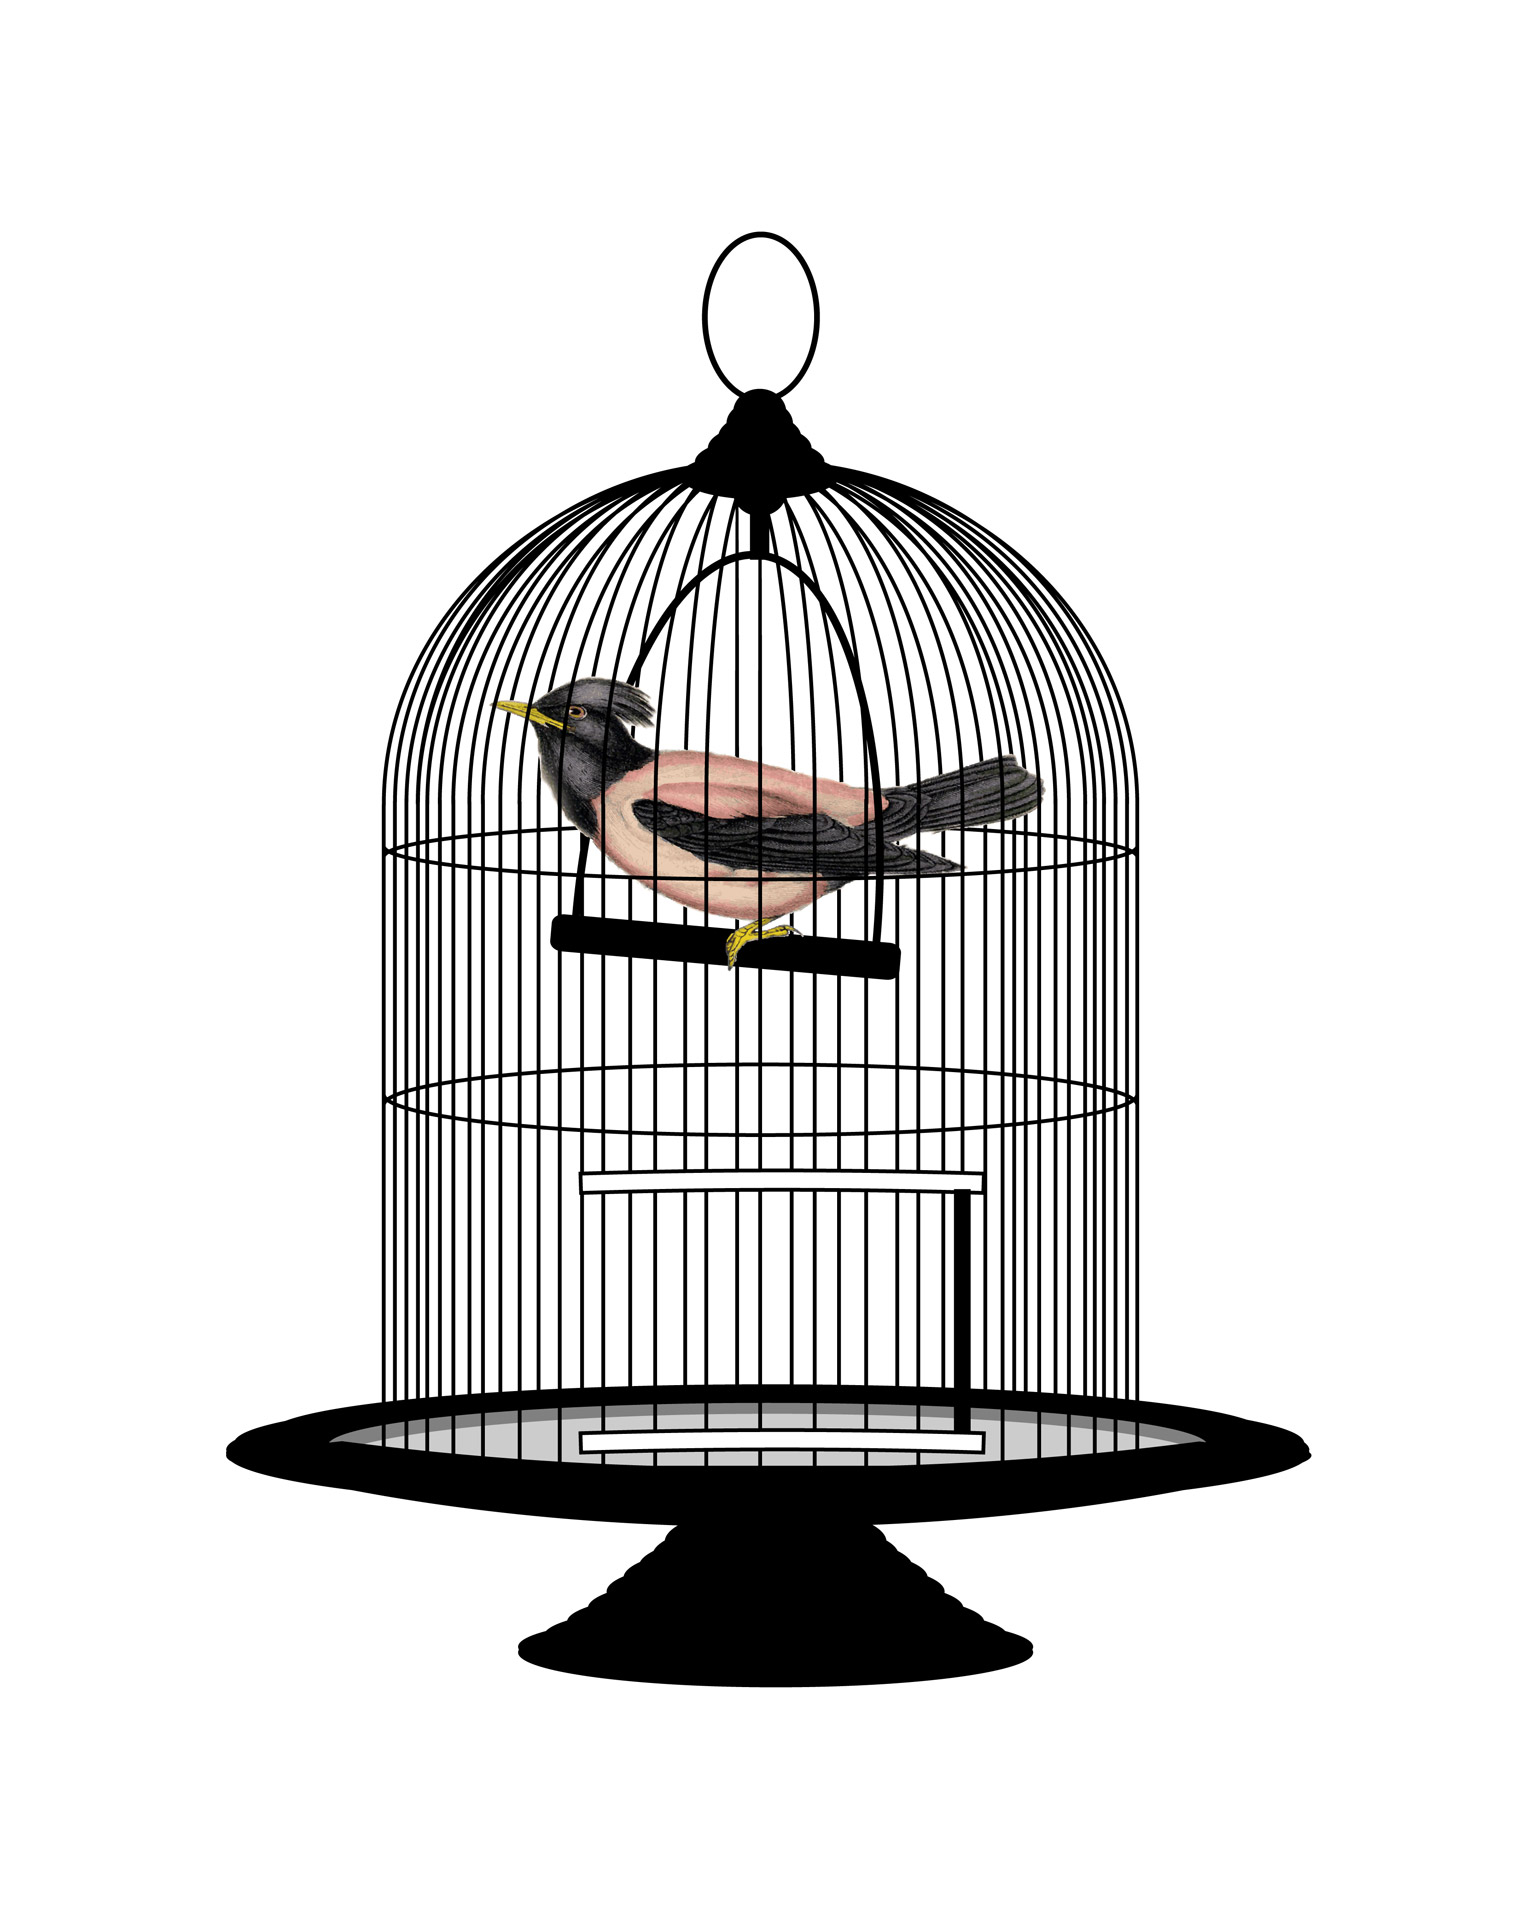 Birdcage clipart #15, Download drawings